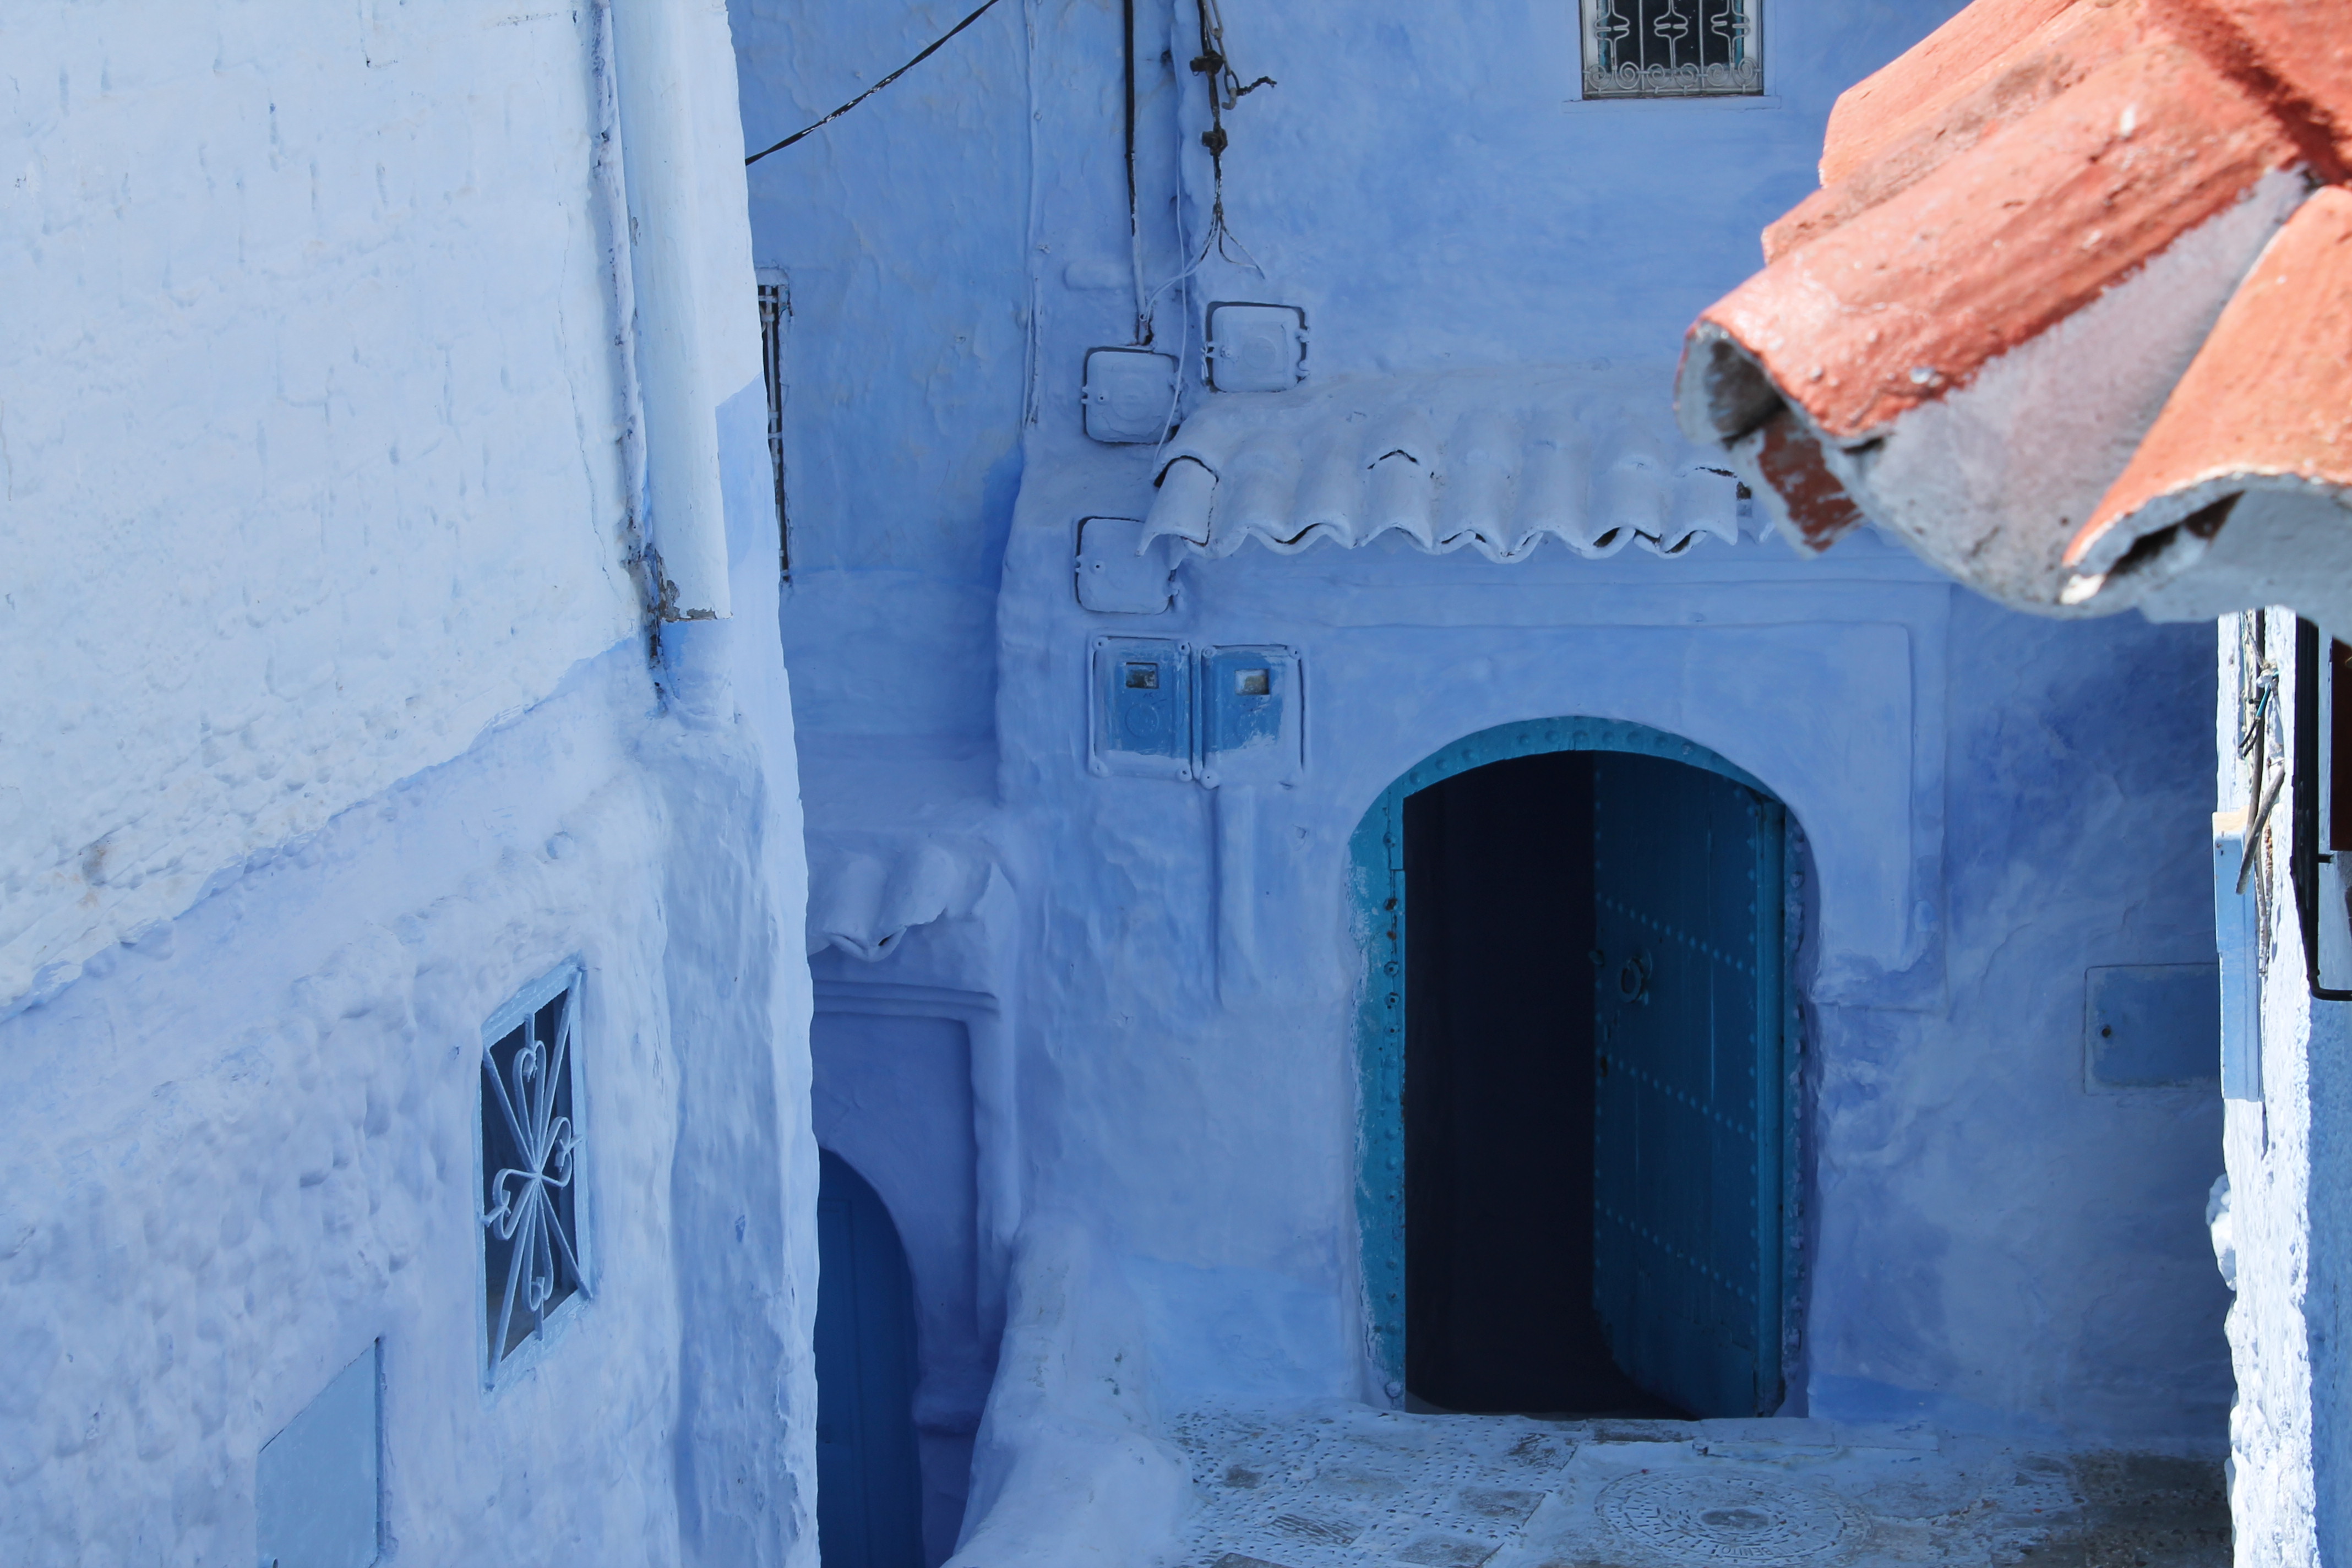 Making You Jealous in Chefchaouen, Morocco